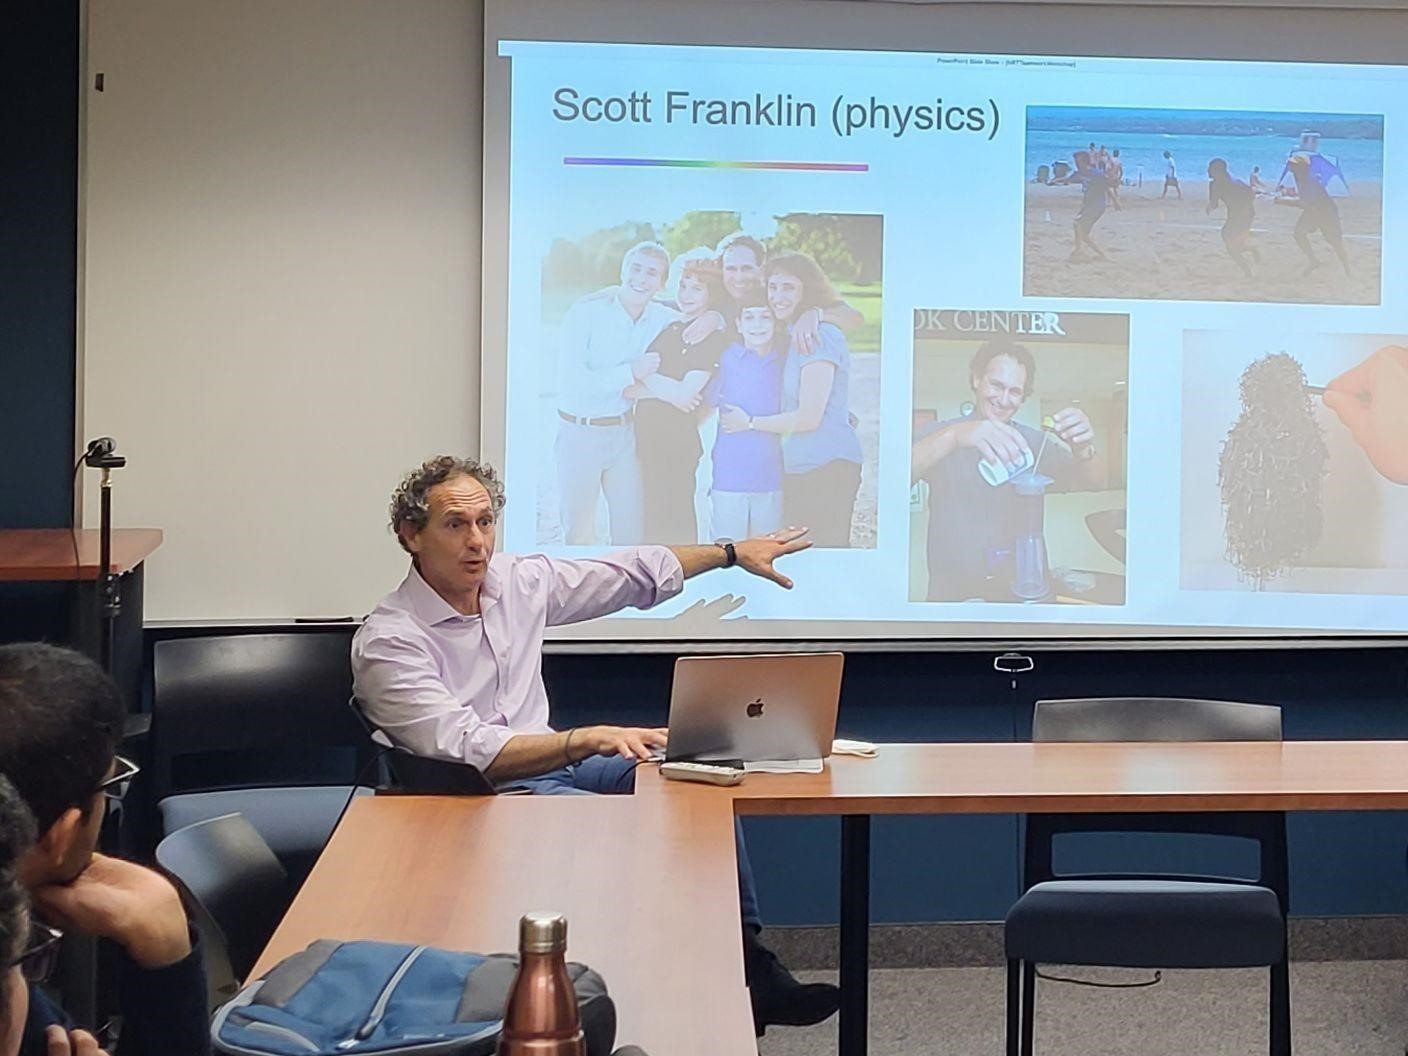 Dr. Scott Franklin, professor of physics and director of CASTLE, offered a workshop on leadership and collaborative research.